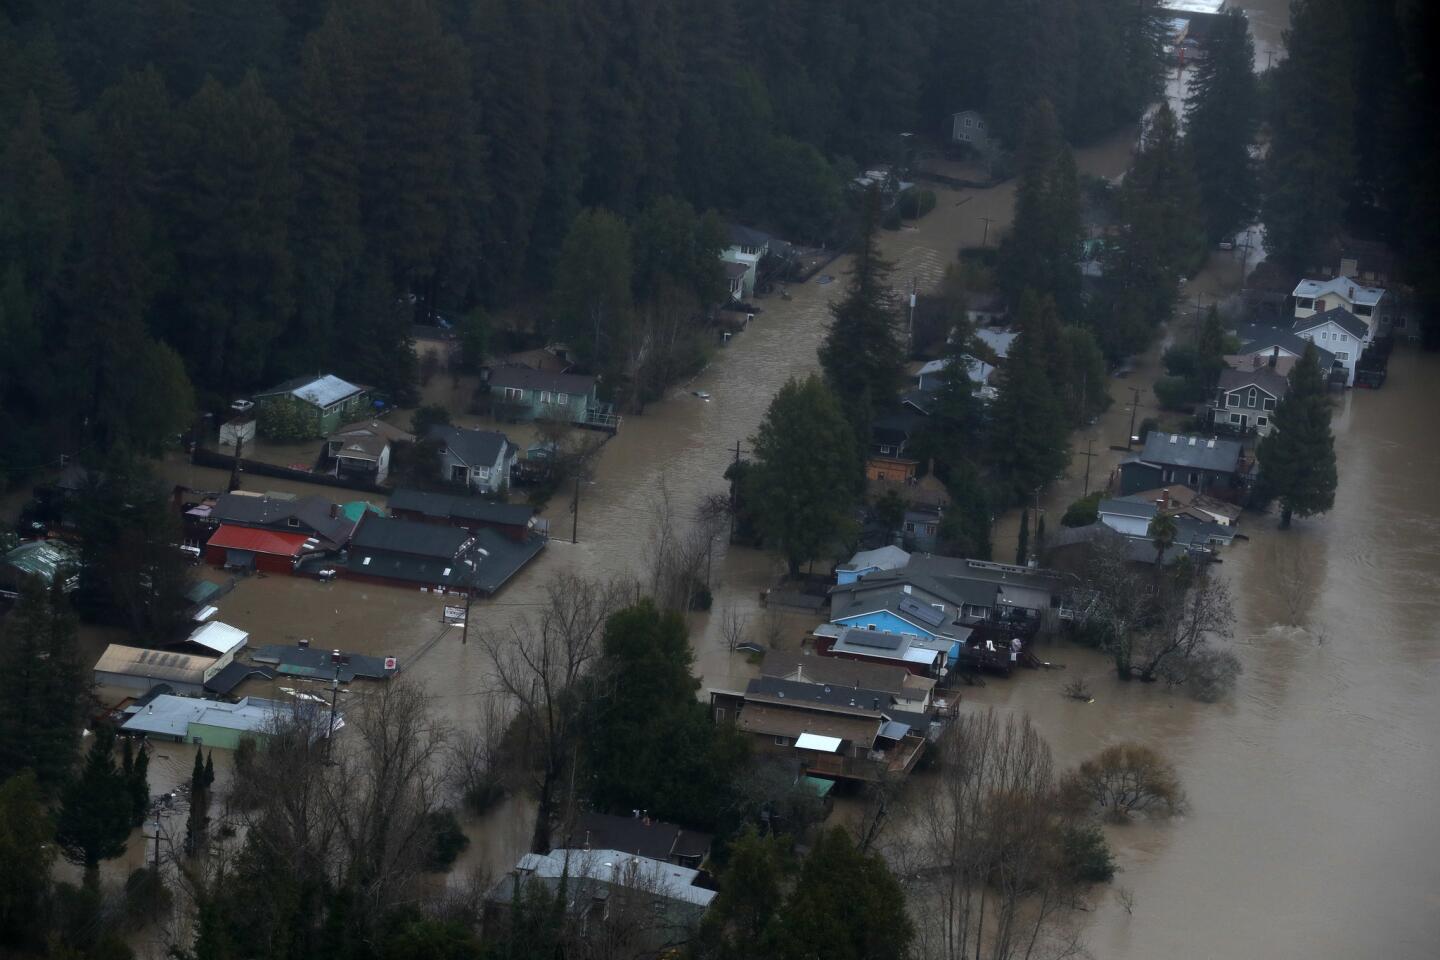 Homes and businesses are inundated by floodwaters Wednesday in Guerneville, Calif.